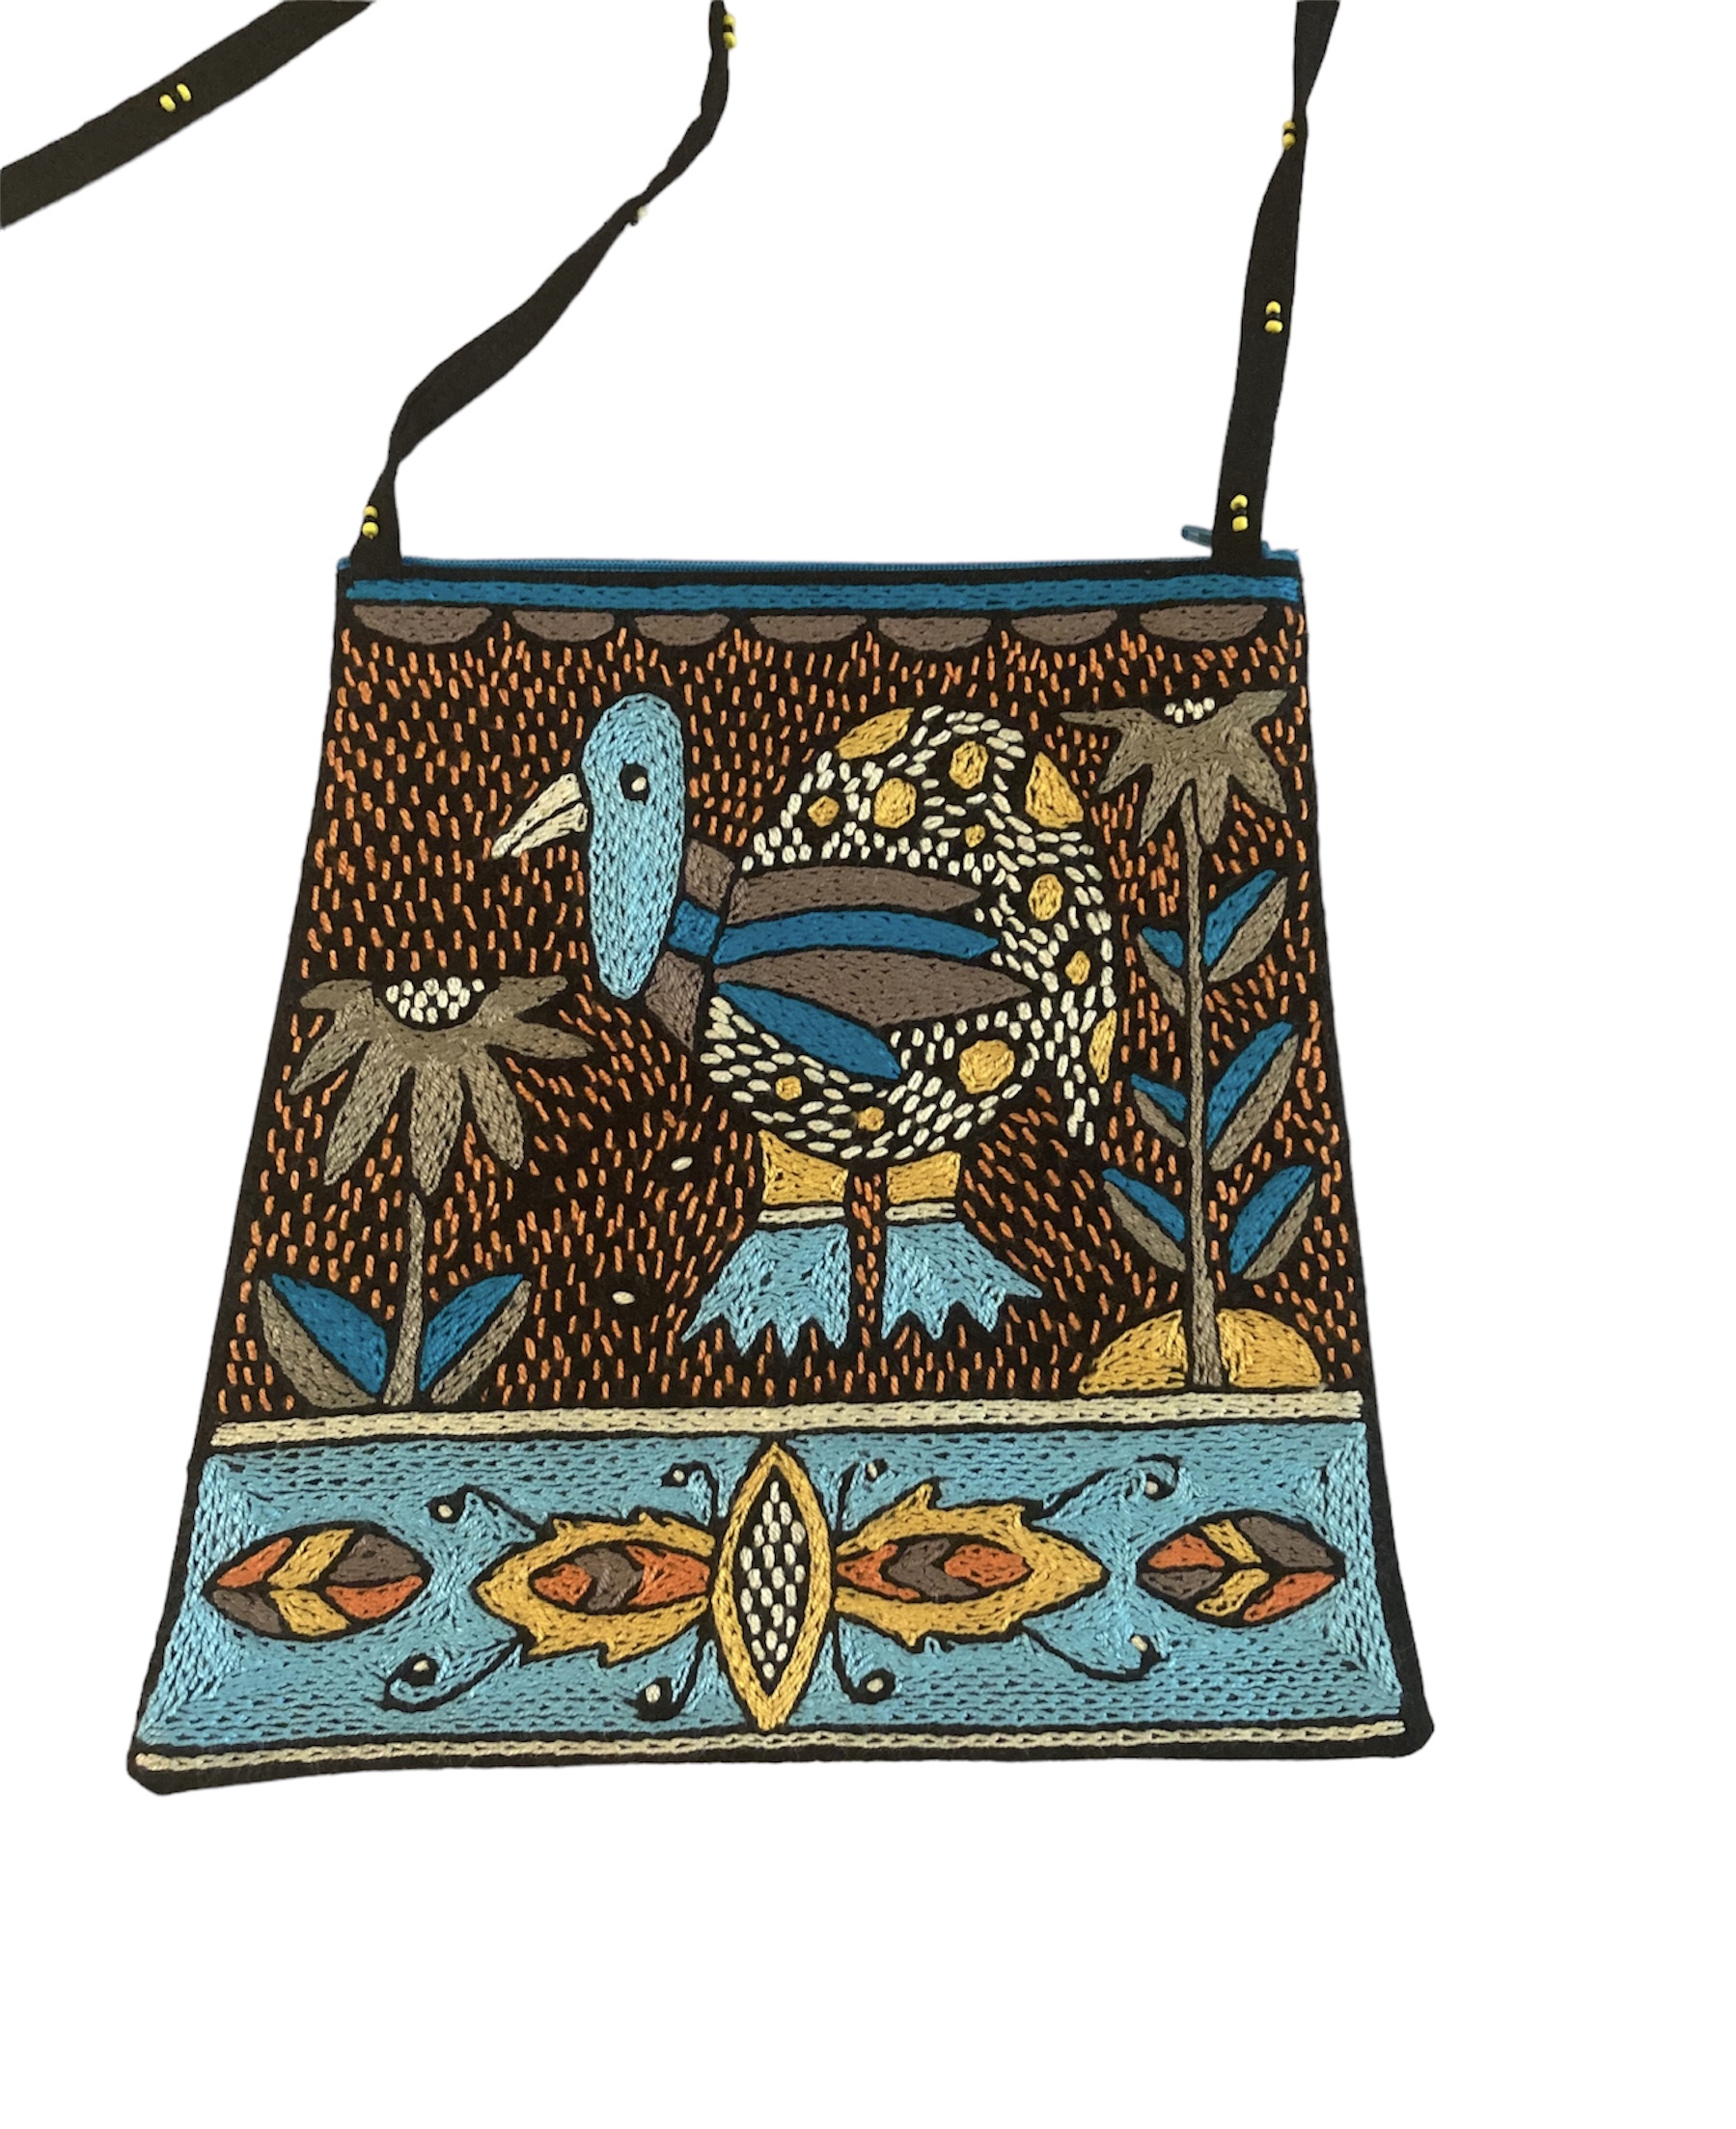 100% Hand-Embroidered Purses